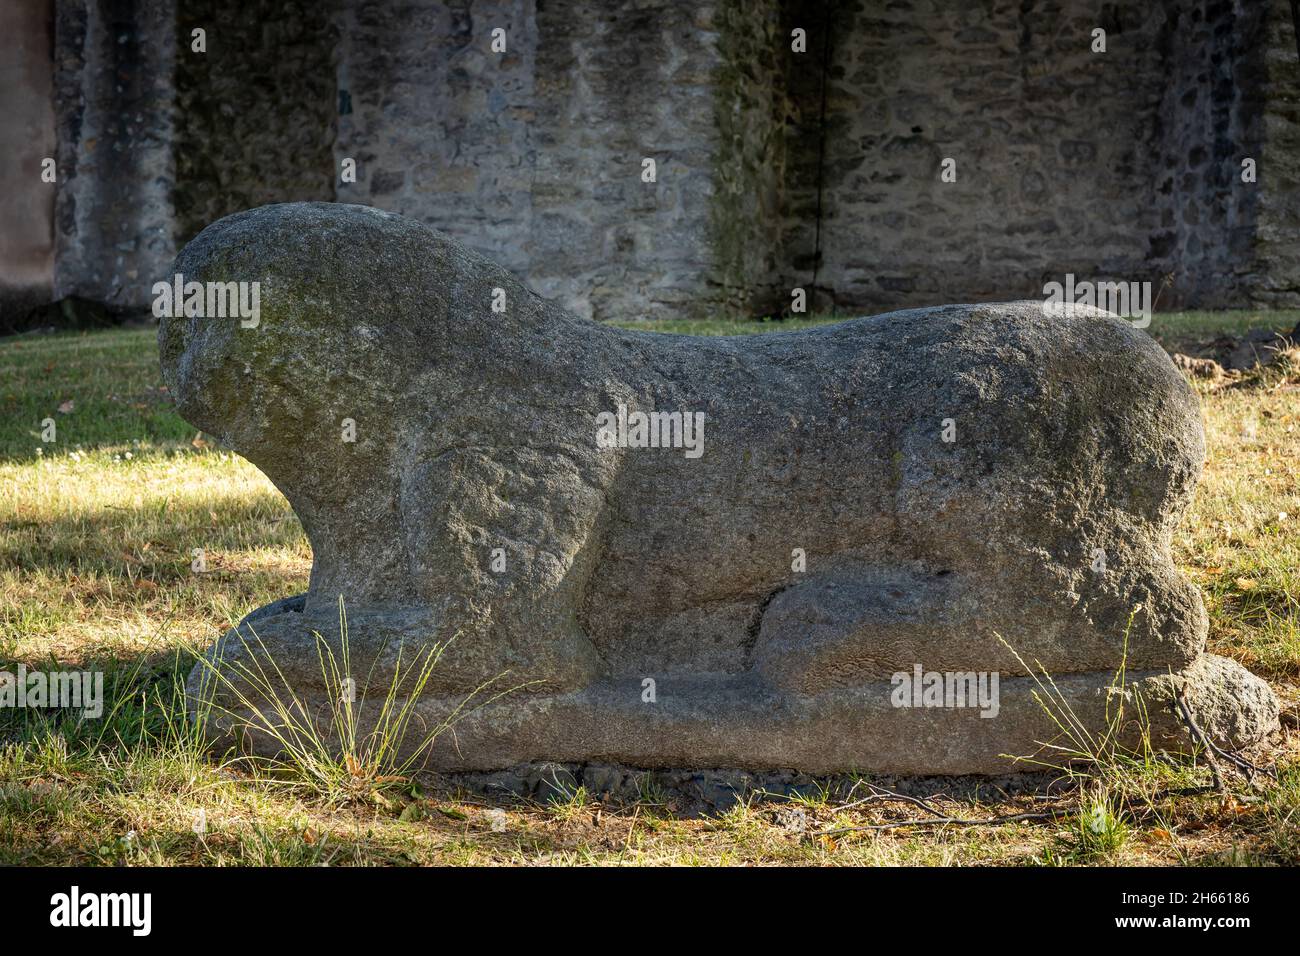 Sobotka, Poland - July 6, 2021: Stone roman lion figure from 12th century, standing in front of St Anna Church. Stock Photo